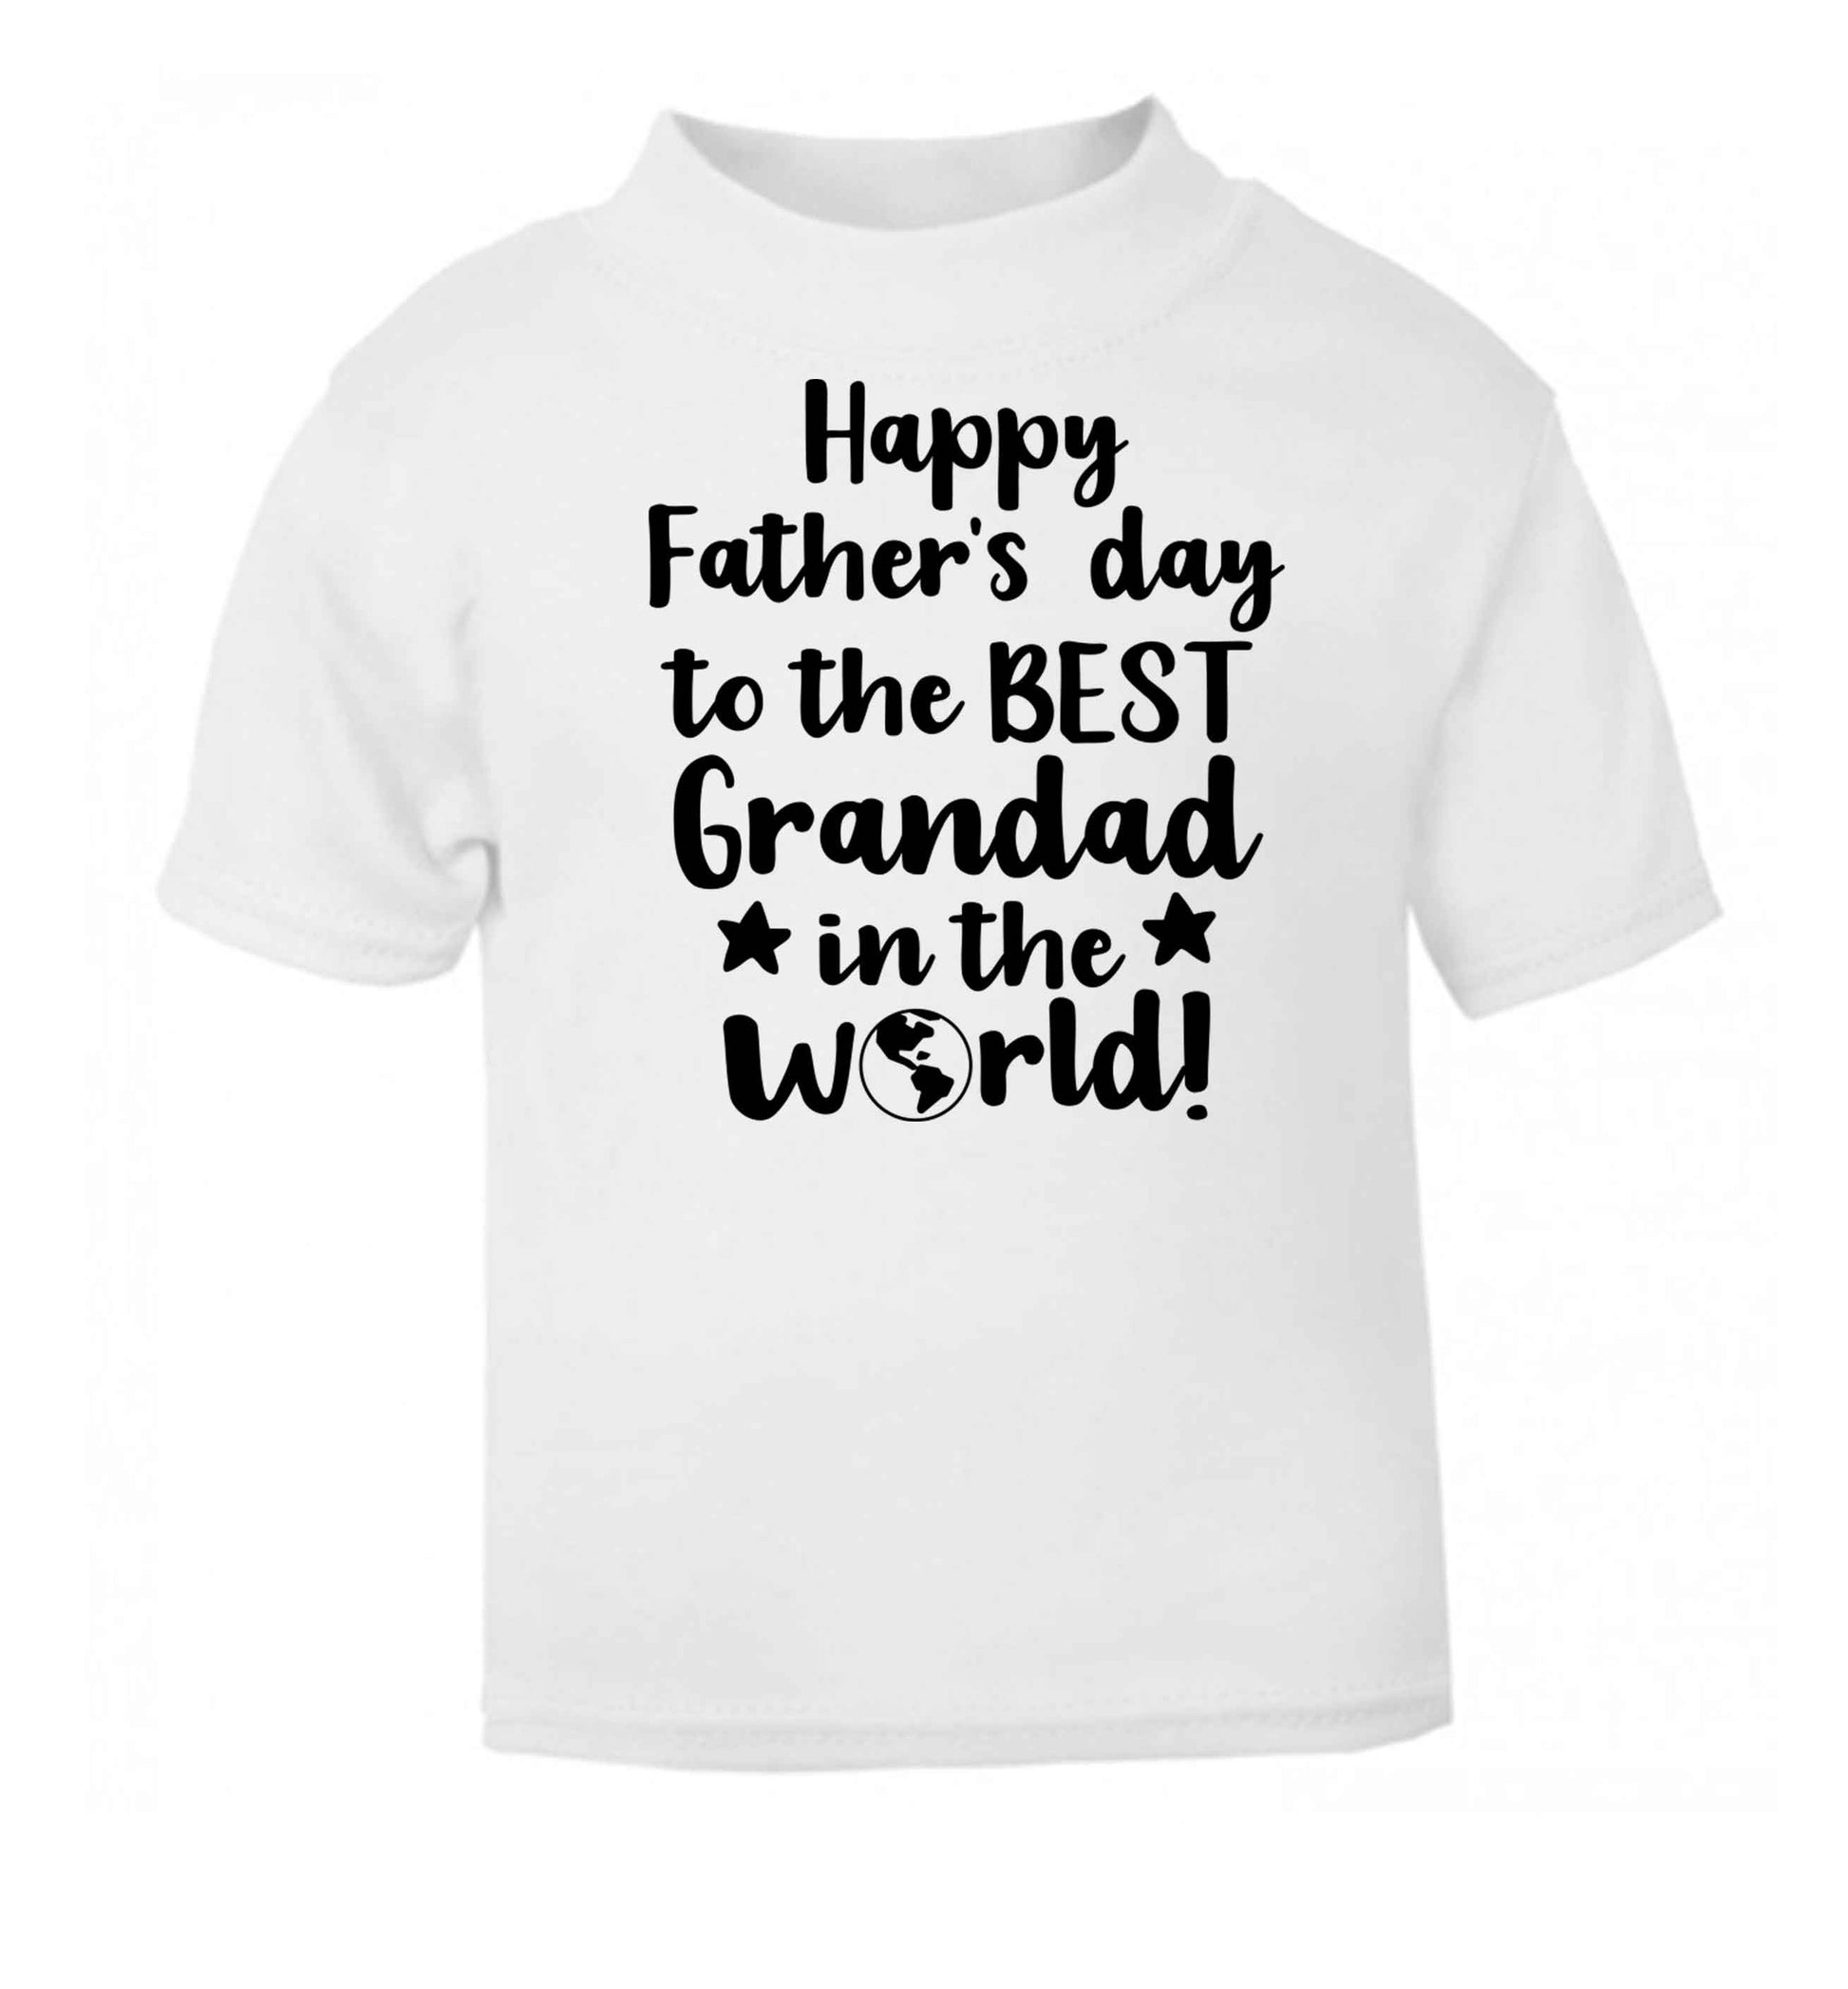 Happy Father's day to the best grandad in the world white baby toddler Tshirt 2 Years